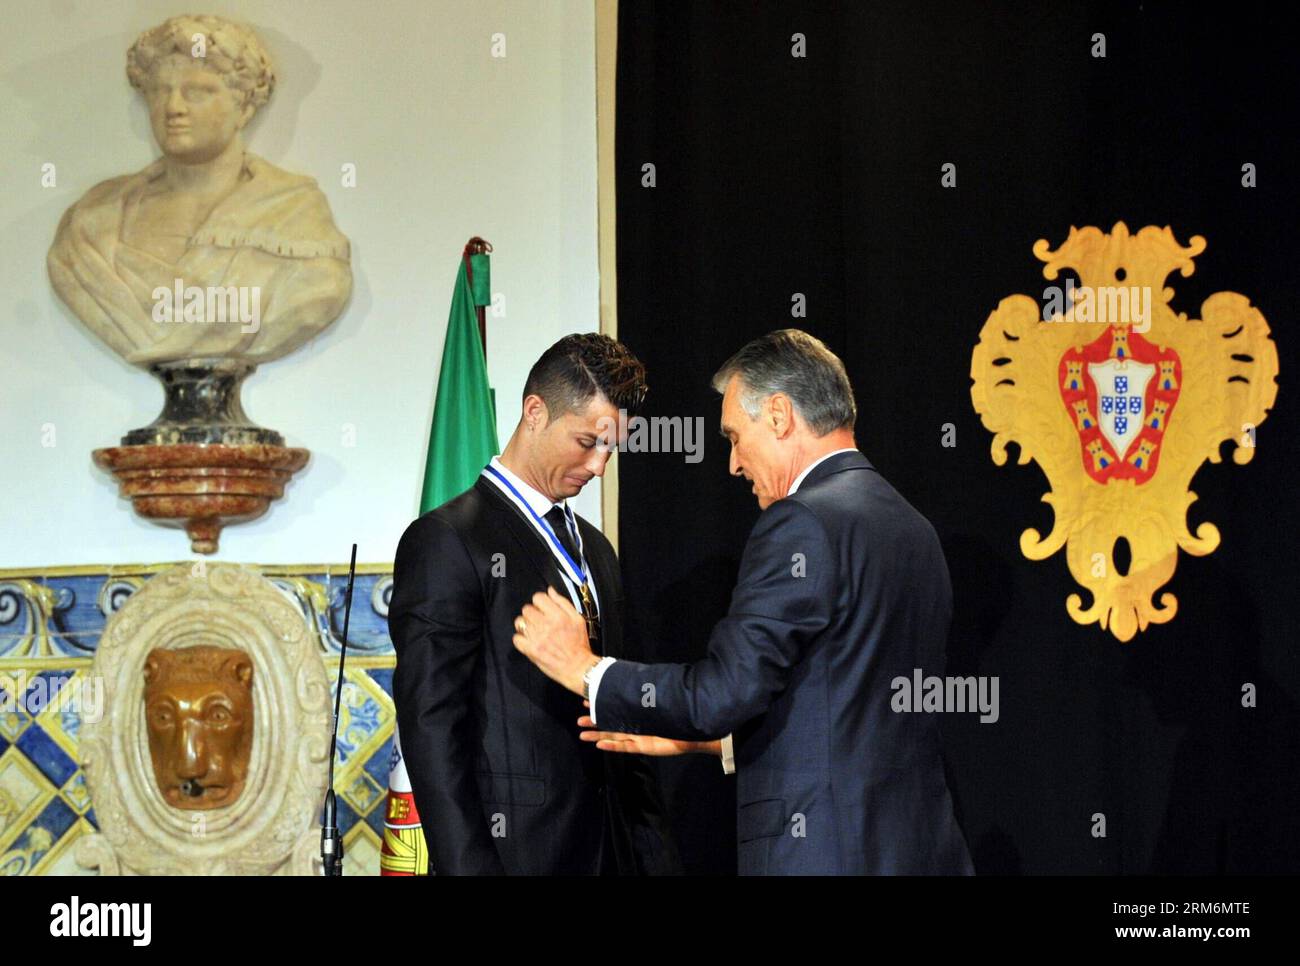 LISBON, Jan. 20, 2014 - Portuguese football super star Cristiano Ronaldo (L) is awarded the Grand Officer of the Order of Infante D. Henrique by Portuguese President Anibal Cavaco Silva at the Presidential Palace in Lisbon, Portugal, on Jan. 20, 2014. Ronaldo was awarded the country s top honor for his contribution to the national team and the prestige he has brought for Portugal around the world. (Xinhua/Zhang Liyun) (hy) (SP)PORTUGAL-LISBON-FOOTBALL-CRISTIANO RONALDO-TOP HONOR AWARDING PUBLICATIONxNOTxINxCHN   Lisbon Jan 20 2014 PORTUGUESE Football Super Star Cristiano Ronaldo l IS awarded T Stock Photo